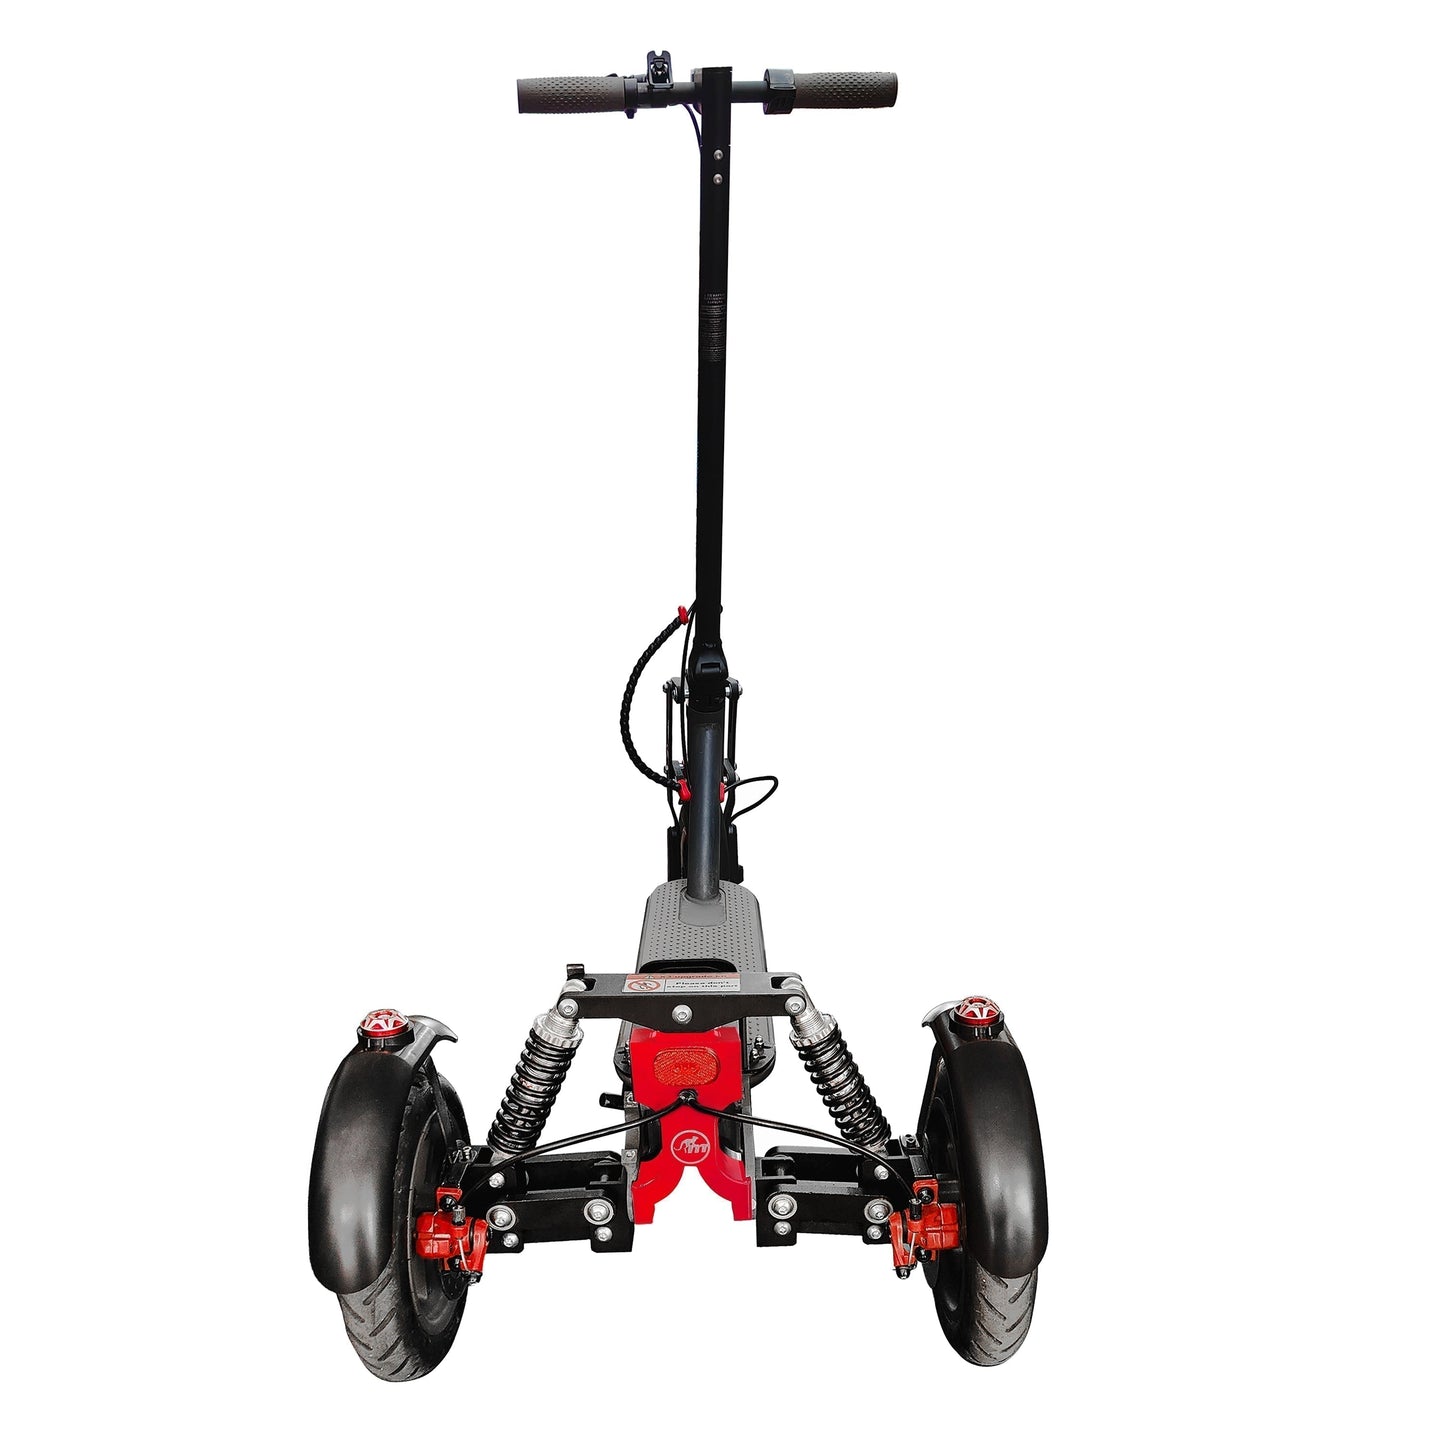 Monorim X3 upgrade kit to be Three wheels special for Hover-1 journey Scooter